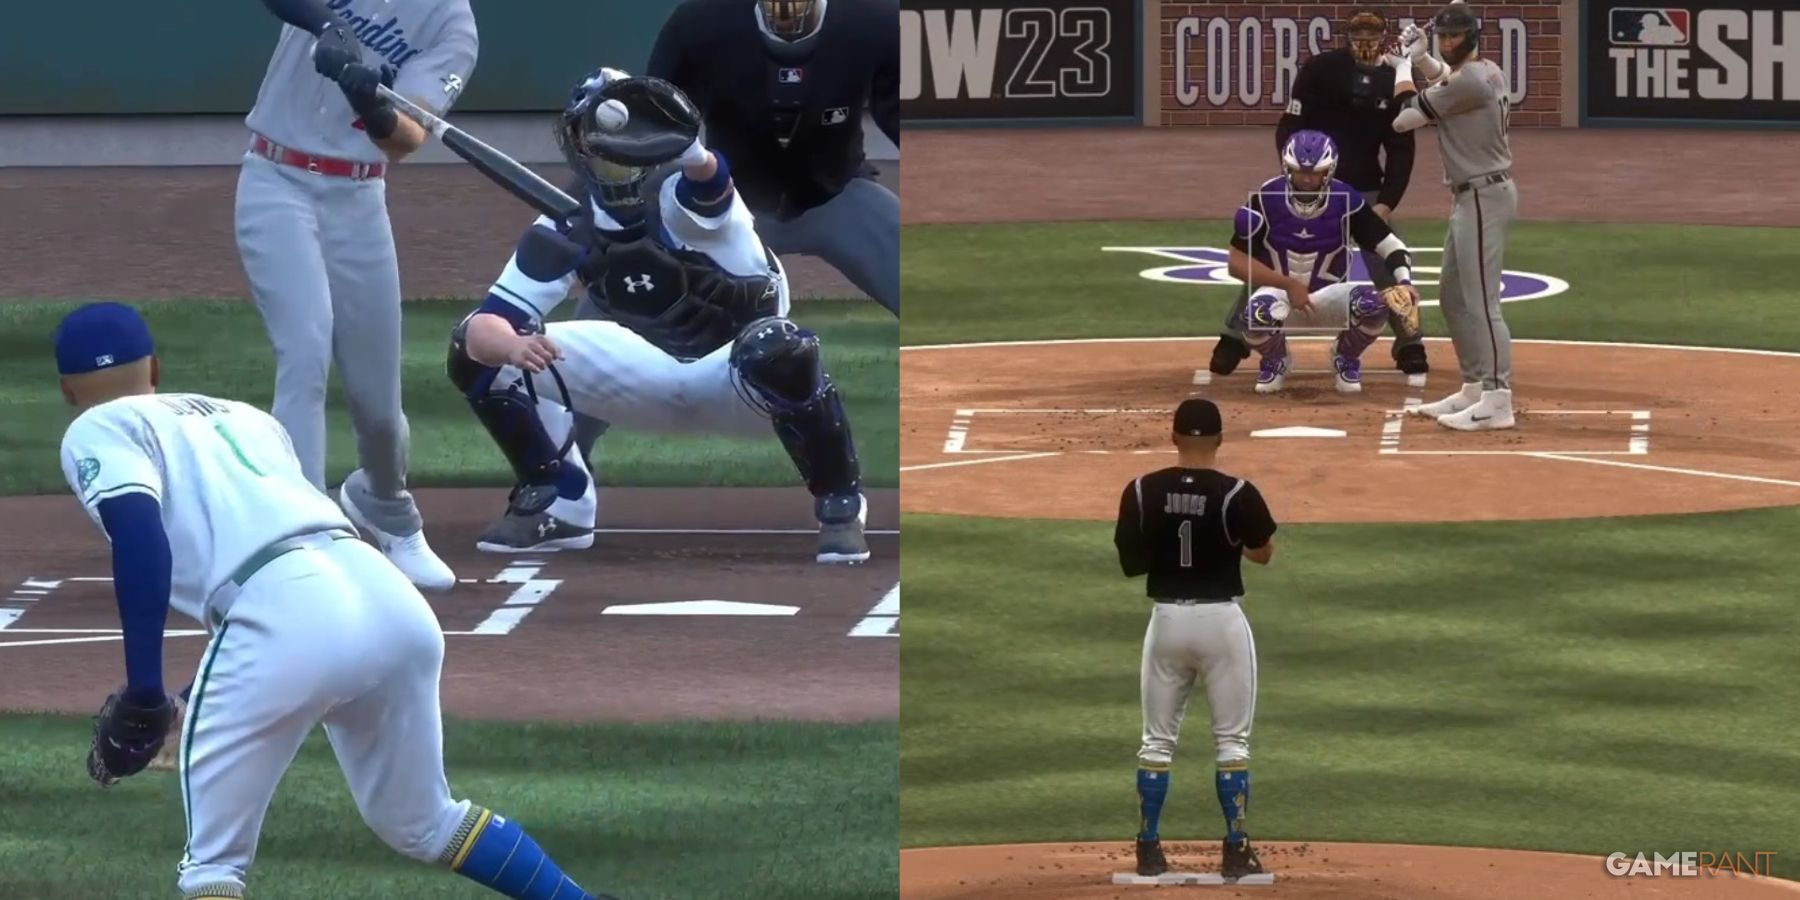 MLB The Show 23 Pitching Settings Guide